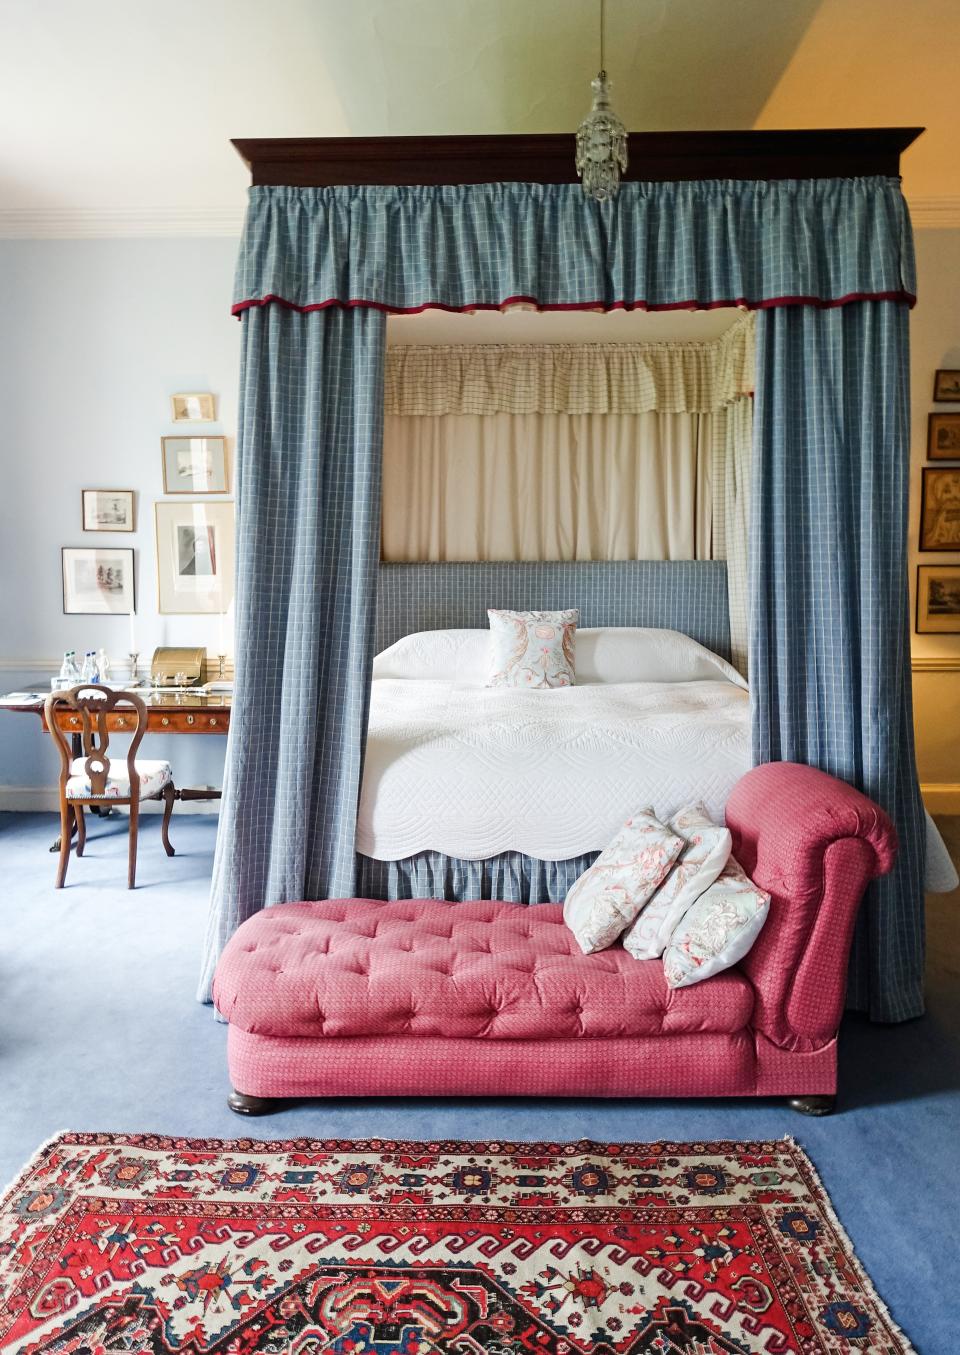 The pale blue walls of this bedroom (one of 18 in the castle) boast antique pictures and blue-and-white porcelain collected by Fitzgerald’s father. The bedrooms in the front of the castle overlook the Shannon Estuary (where the River Shannon flows to the Atlantic Ocean), while those in the back overlook the extensive lawns and well-manicured shrubs of the garden. Playing in the garden as a child is what inspired Fitzgerald to pursue her career as a landscape designer. “It’s not a huge garden but it’s a very special, magical garden,” says Fitzgerald. “I’ll plant hundreds of bulbs every winter and then they spread in the spring.”